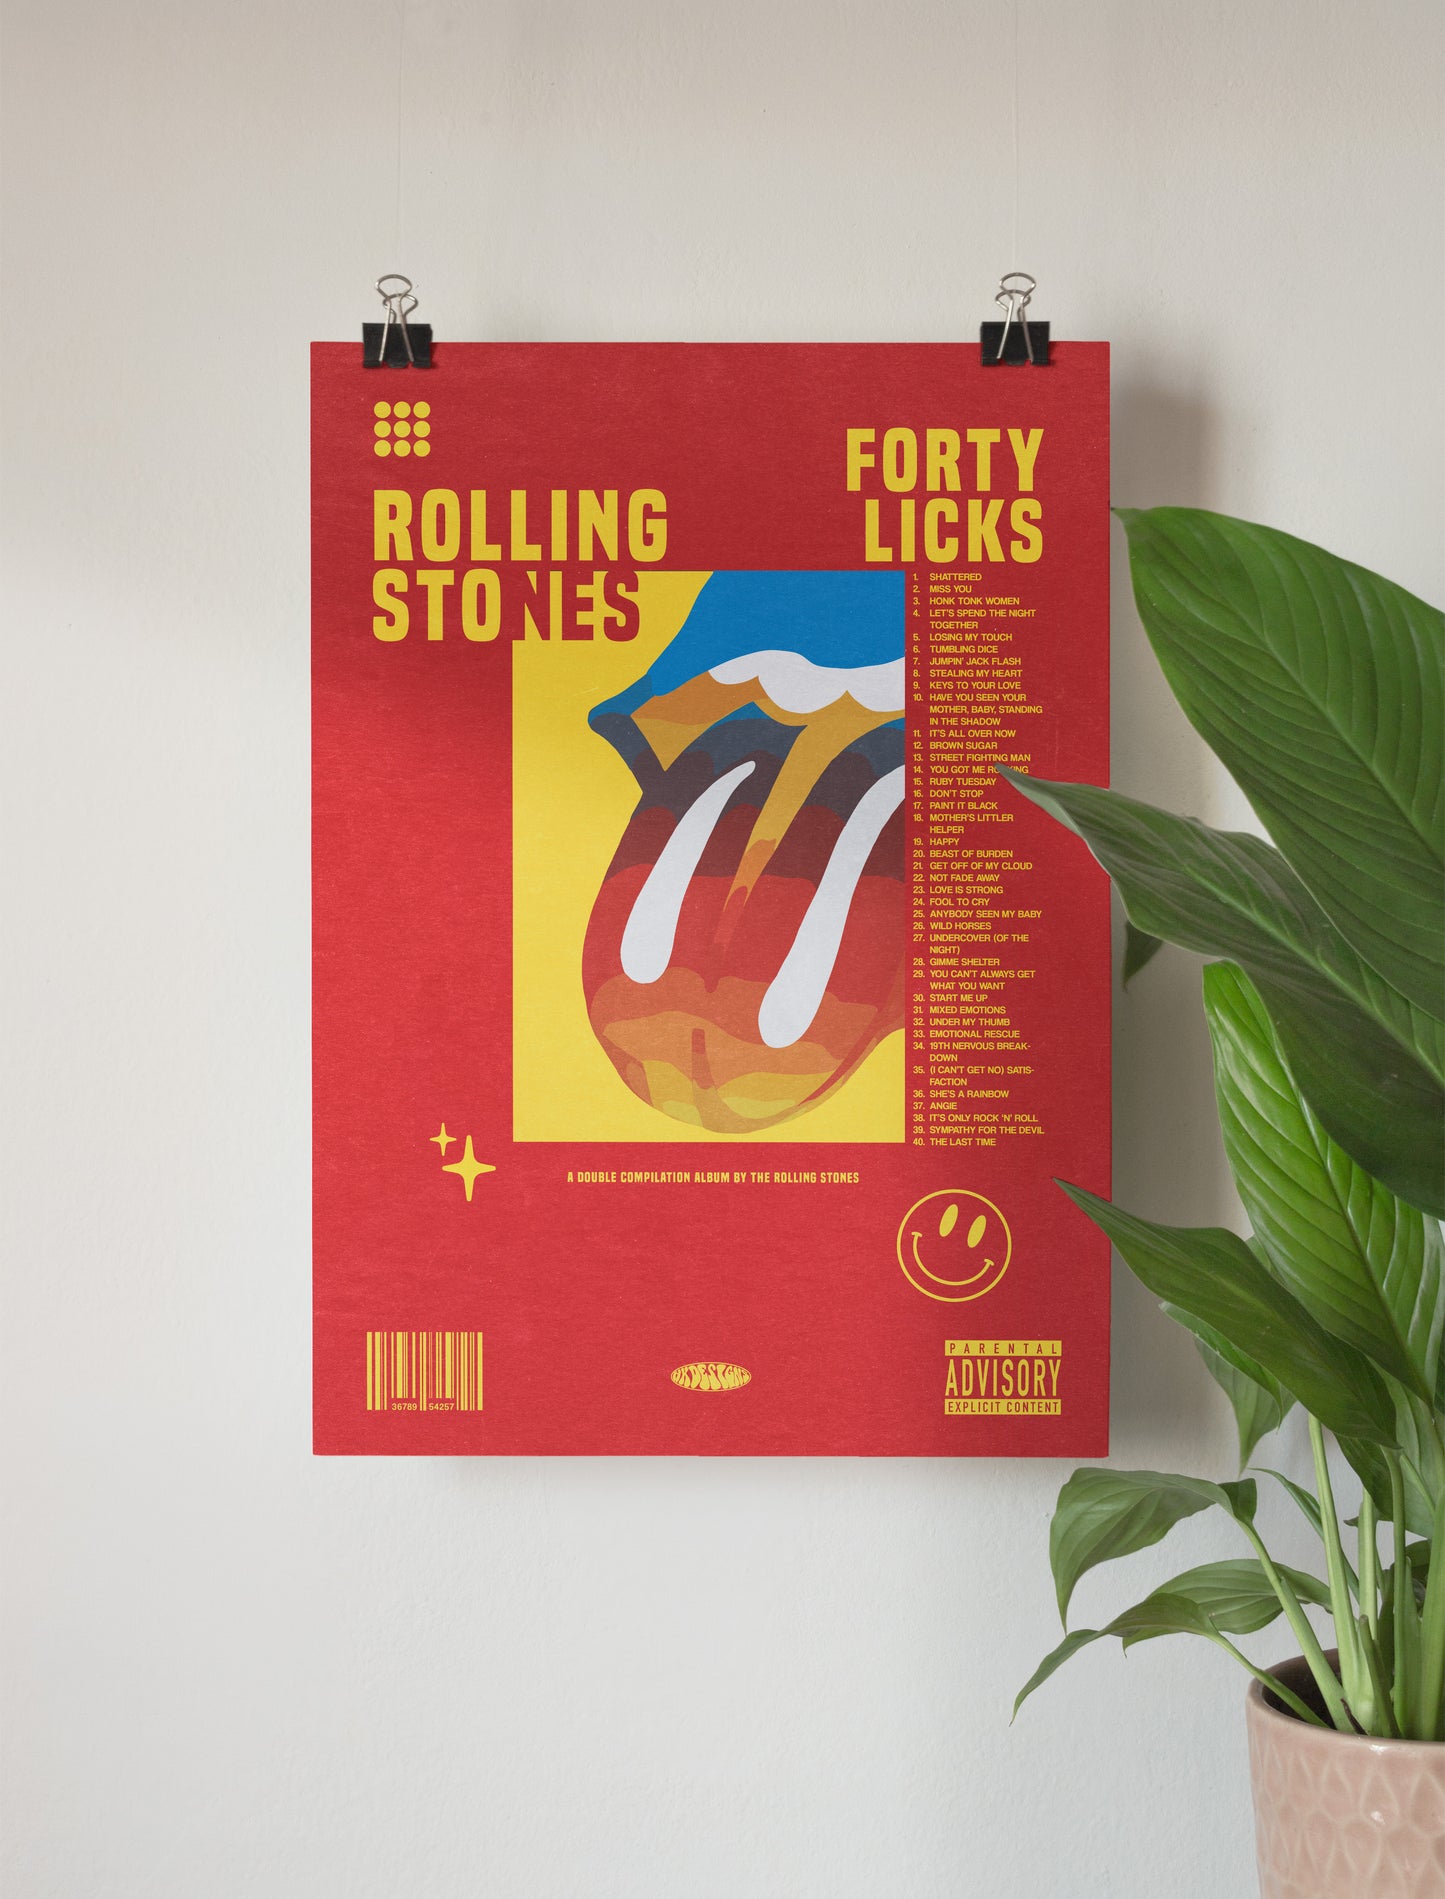 'Forty Licks' by Rolling Stones